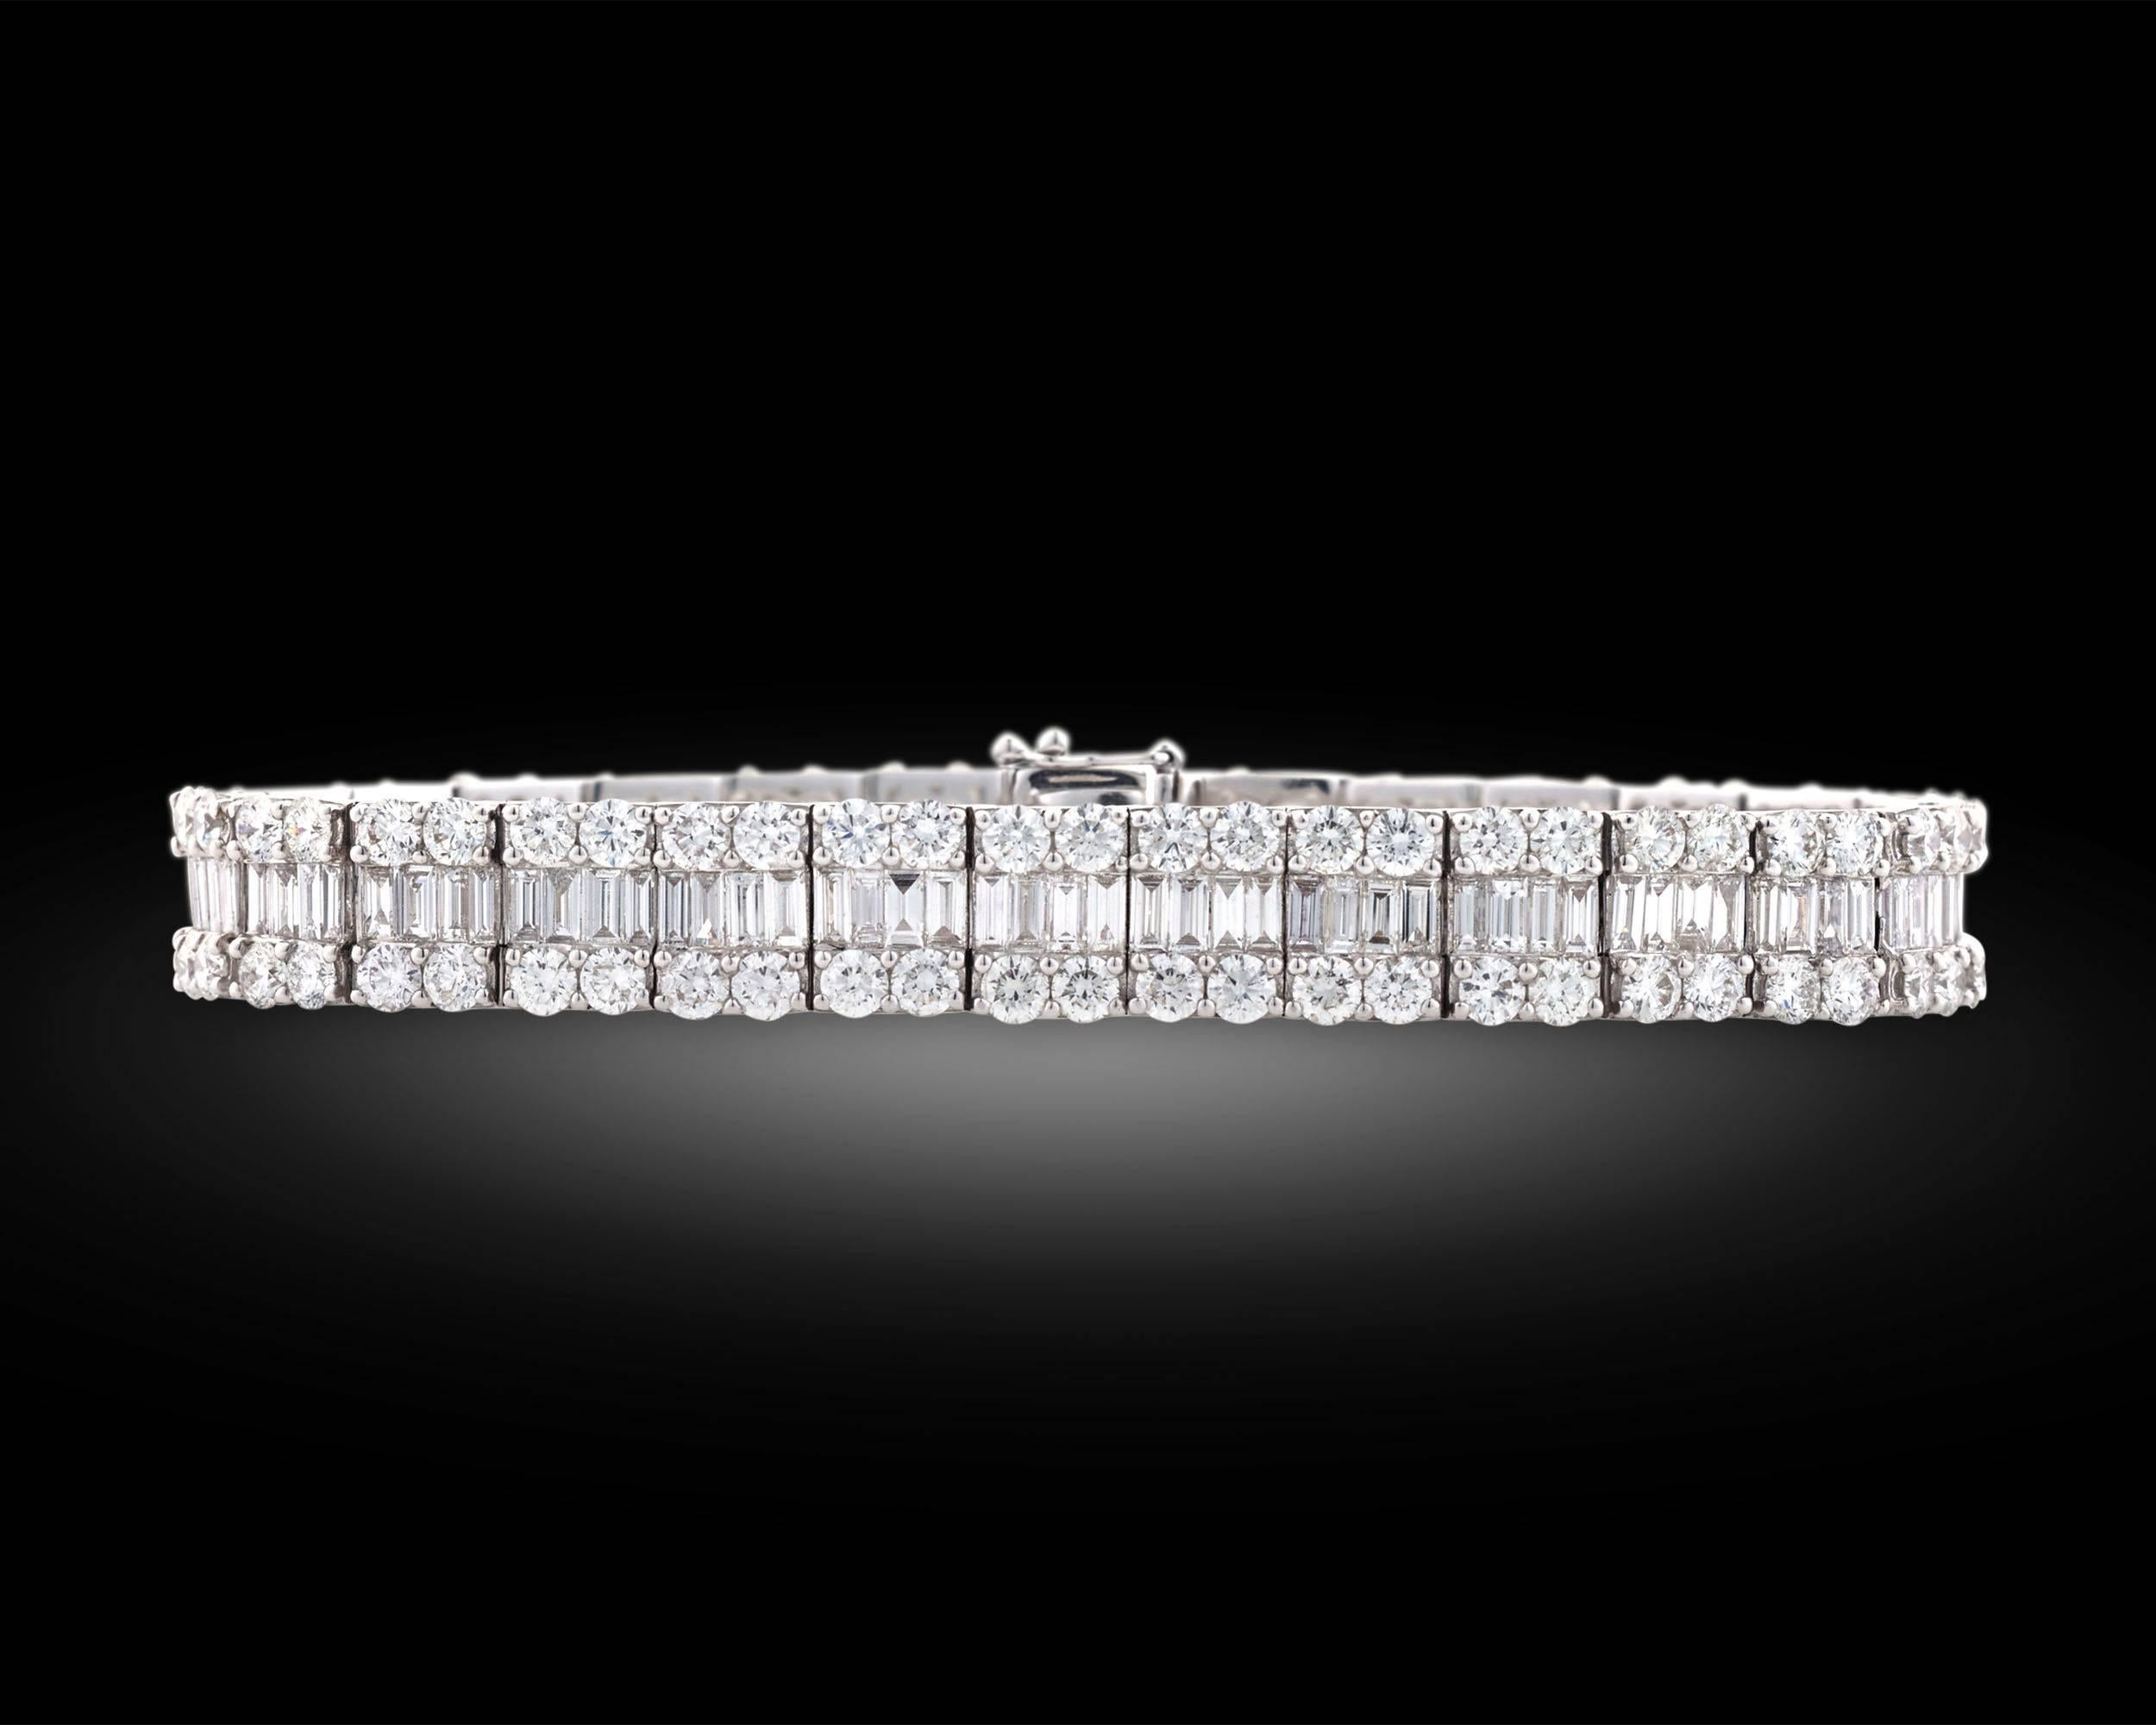 This impeccable bracelet showcases a stunning collection of pure white diamonds. 112 dazzling round-cut diamonds totaling 9.84 carats encase 4.27 total carats of baguette-cut diamonds in the luxurious design. Boasting over 14.00 carats of diamonds